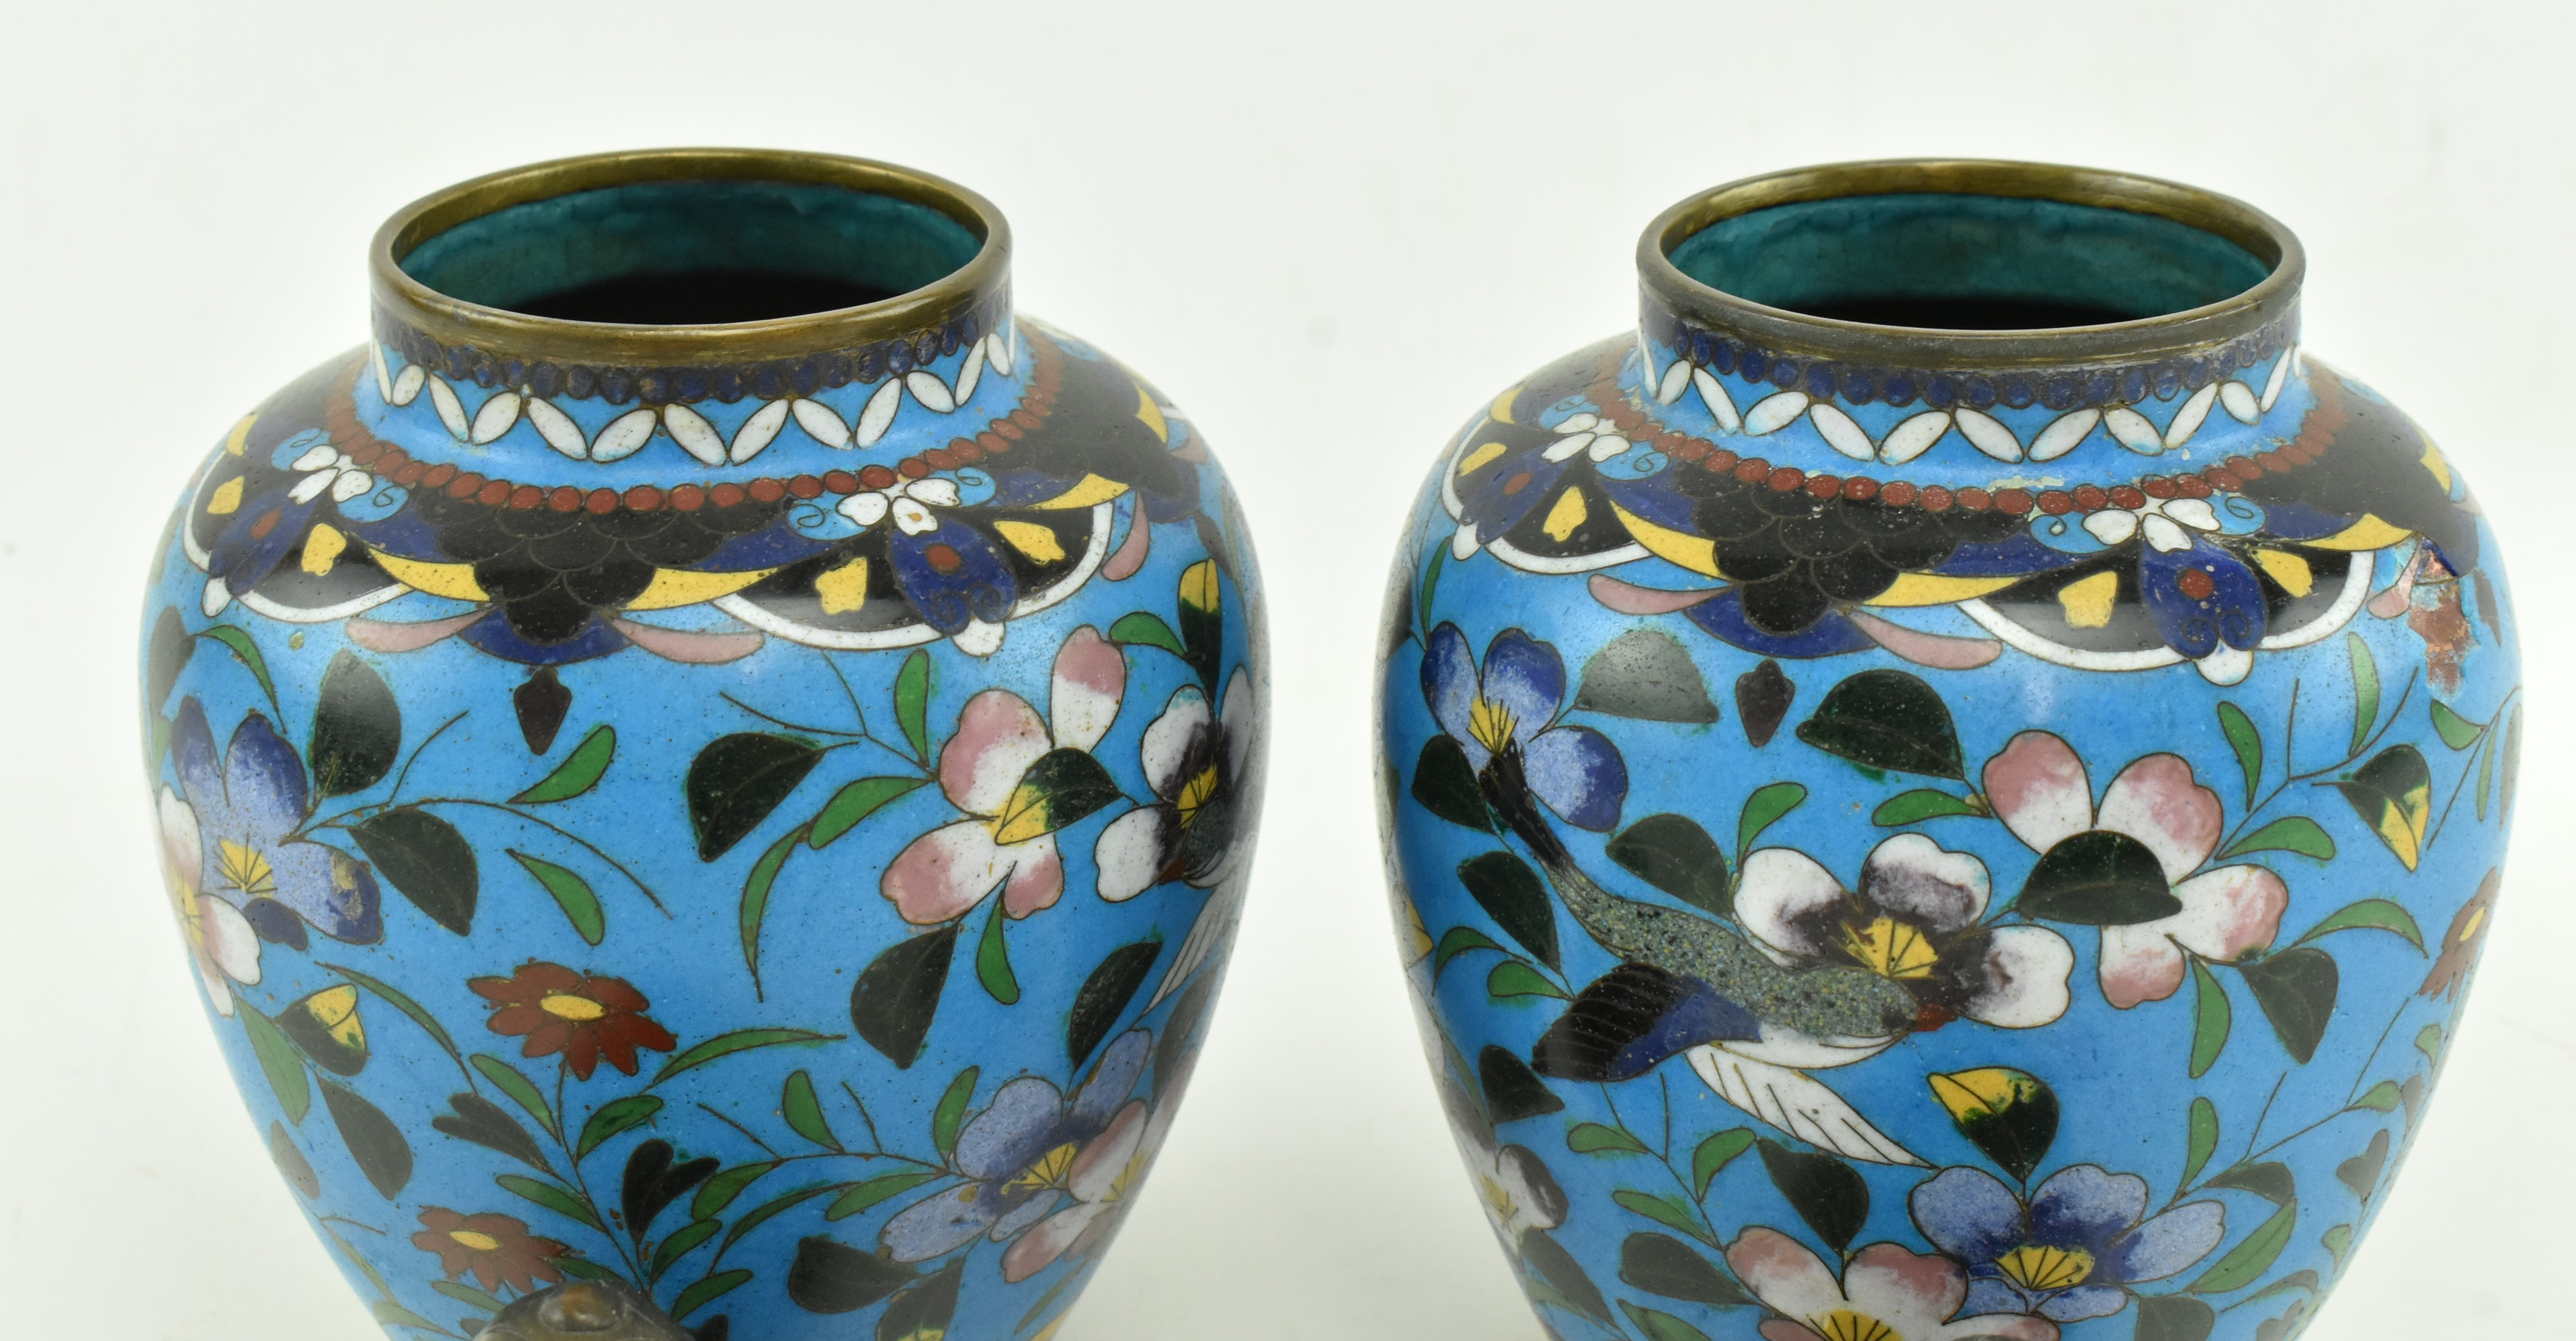 PAIR OF JAPANESE MEIJI PERIOD CLOISONNE JARS WITH COVER - Image 3 of 6